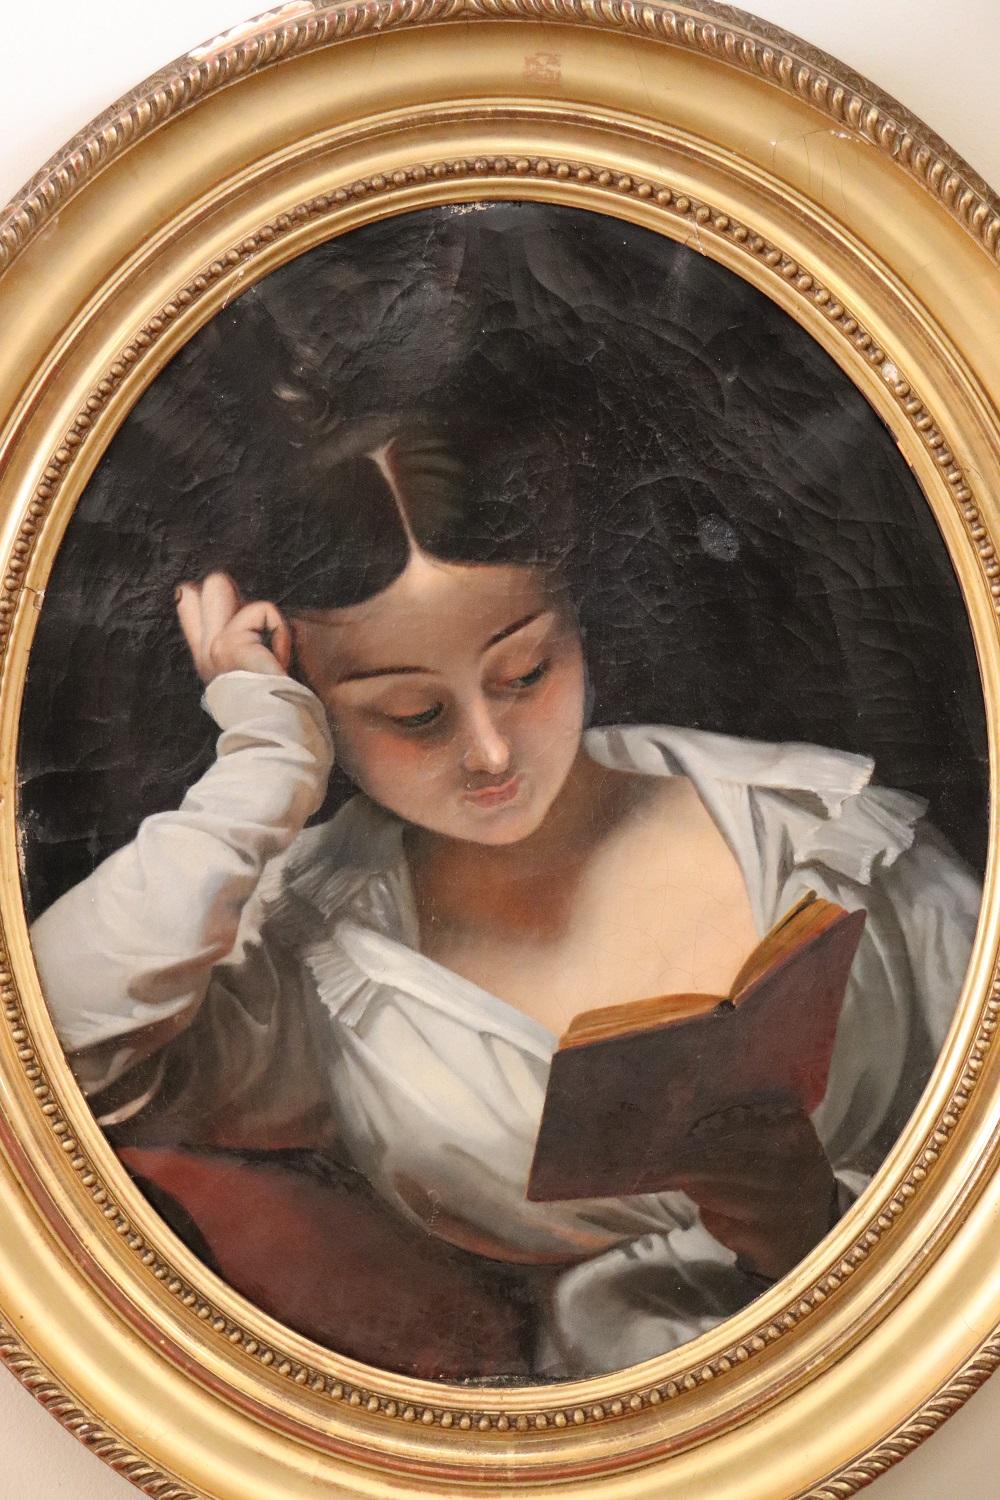 Beautiful antique Italian oil painting on canvas 1850s. Oval Portrait of a young girl reading. High artistic quality note the perfection in portraying the girl's face completely immersed in reading her book. The sweet and clean face reflects the